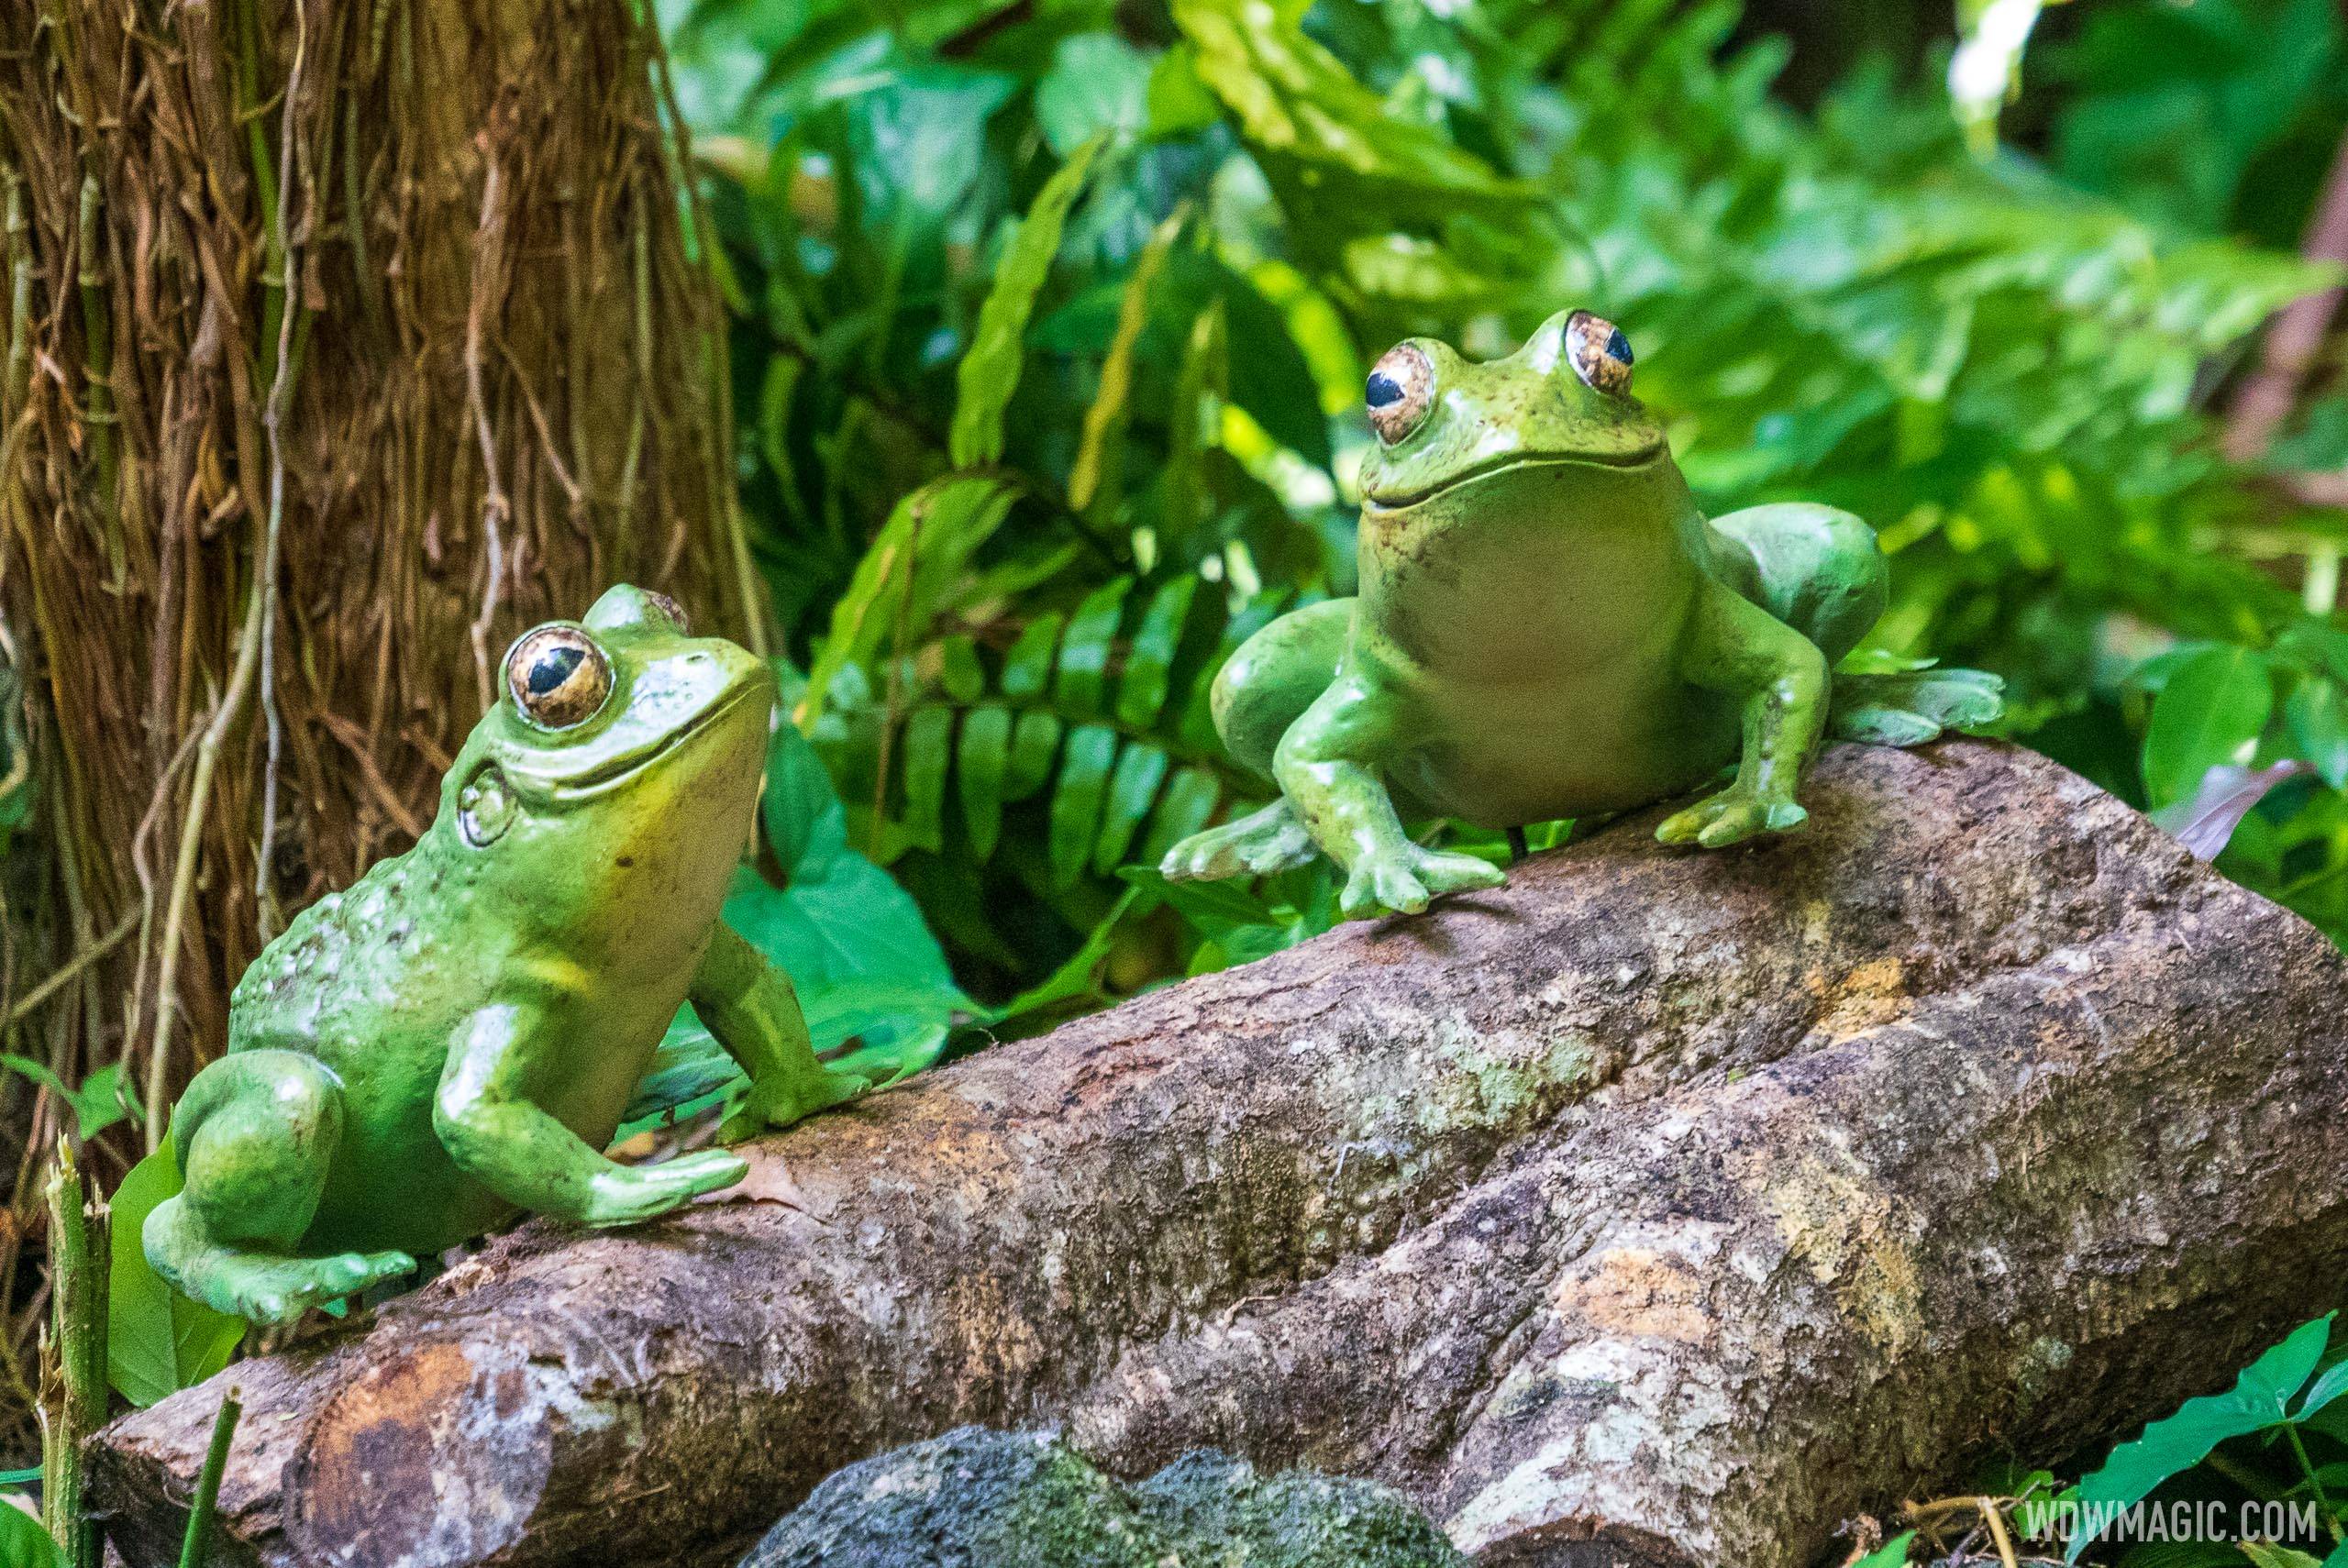 Frogs return to the Magic Kingdom's World Famous Jungle Cruise after a 49-year hiatus